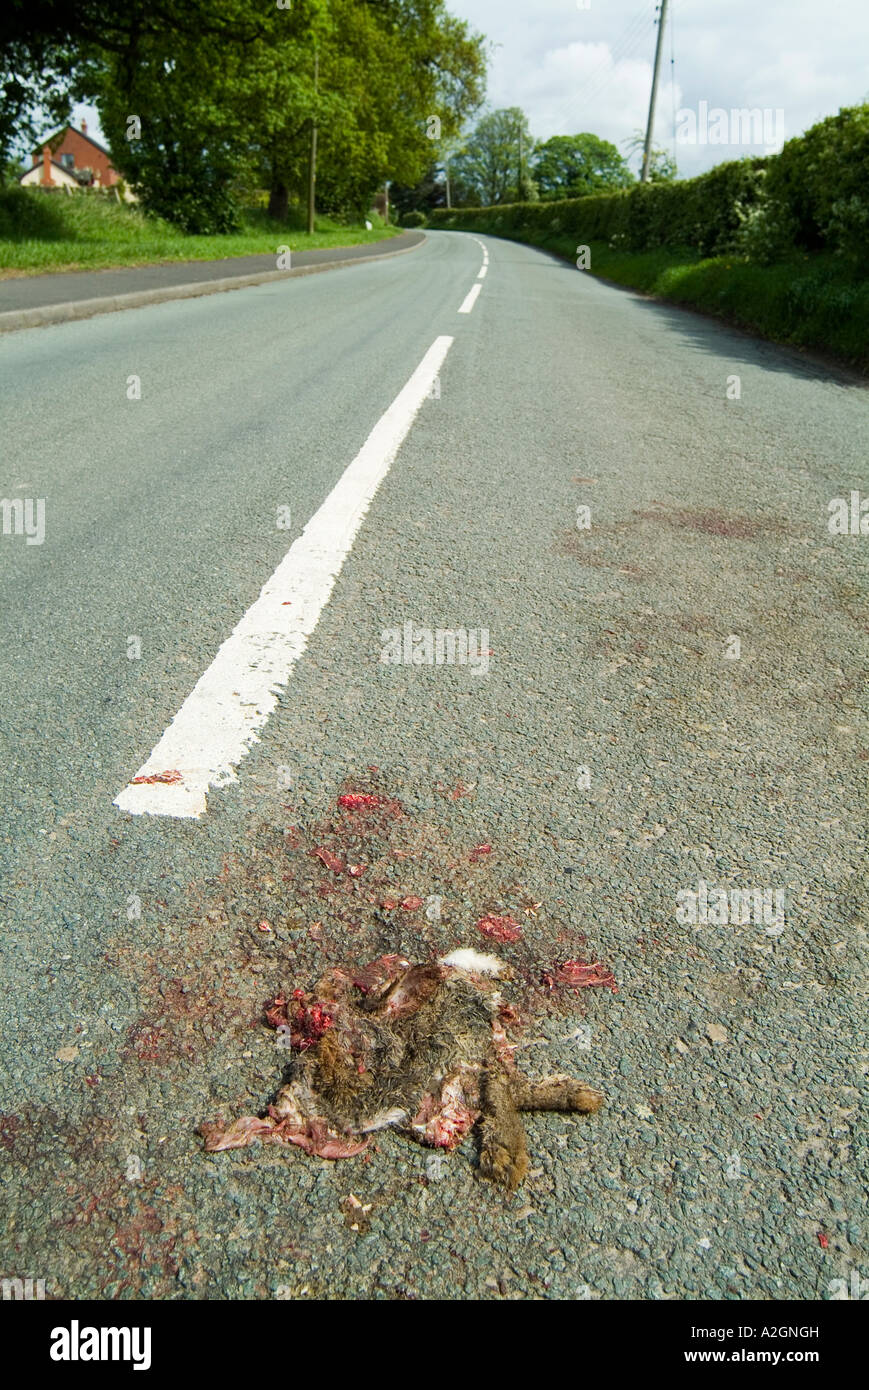 Rabbit killed by motorists and run over flat on the road Stock Photo